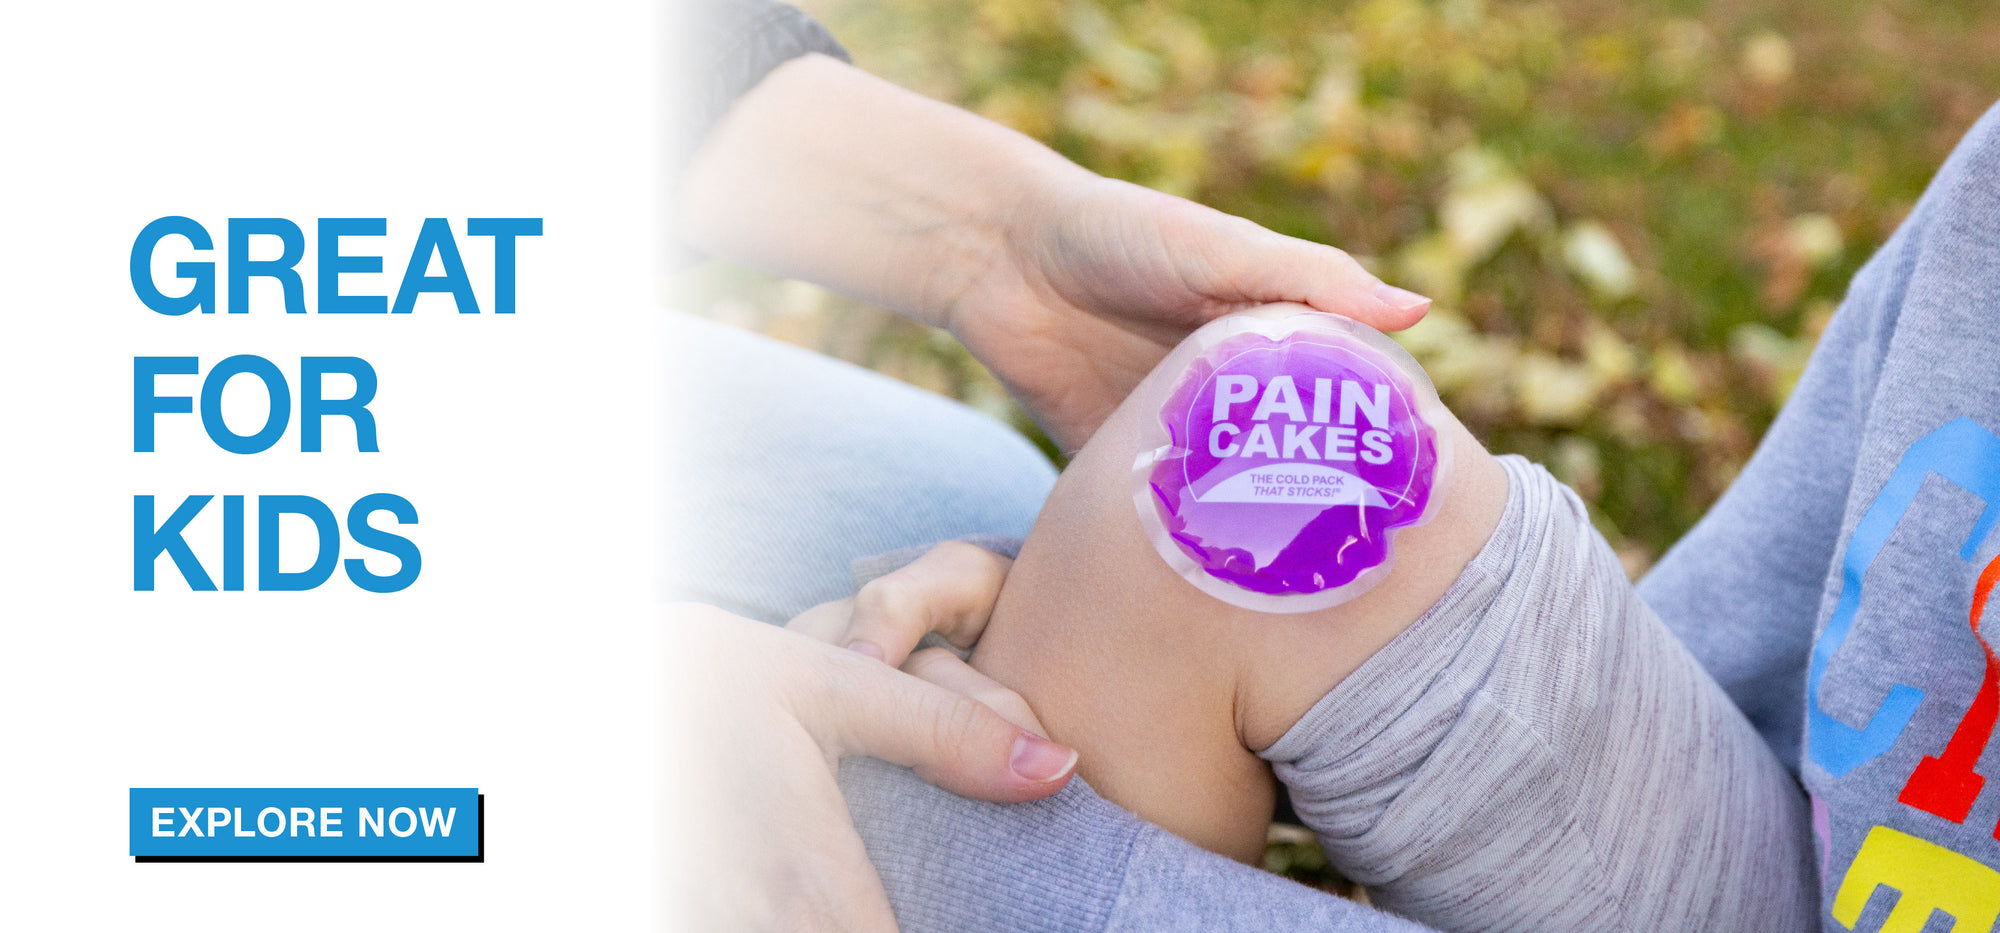 Mini PainCakes cold pack on a child's knee. Text, "GREAT FOR KIDS. EXPLORE NOW"